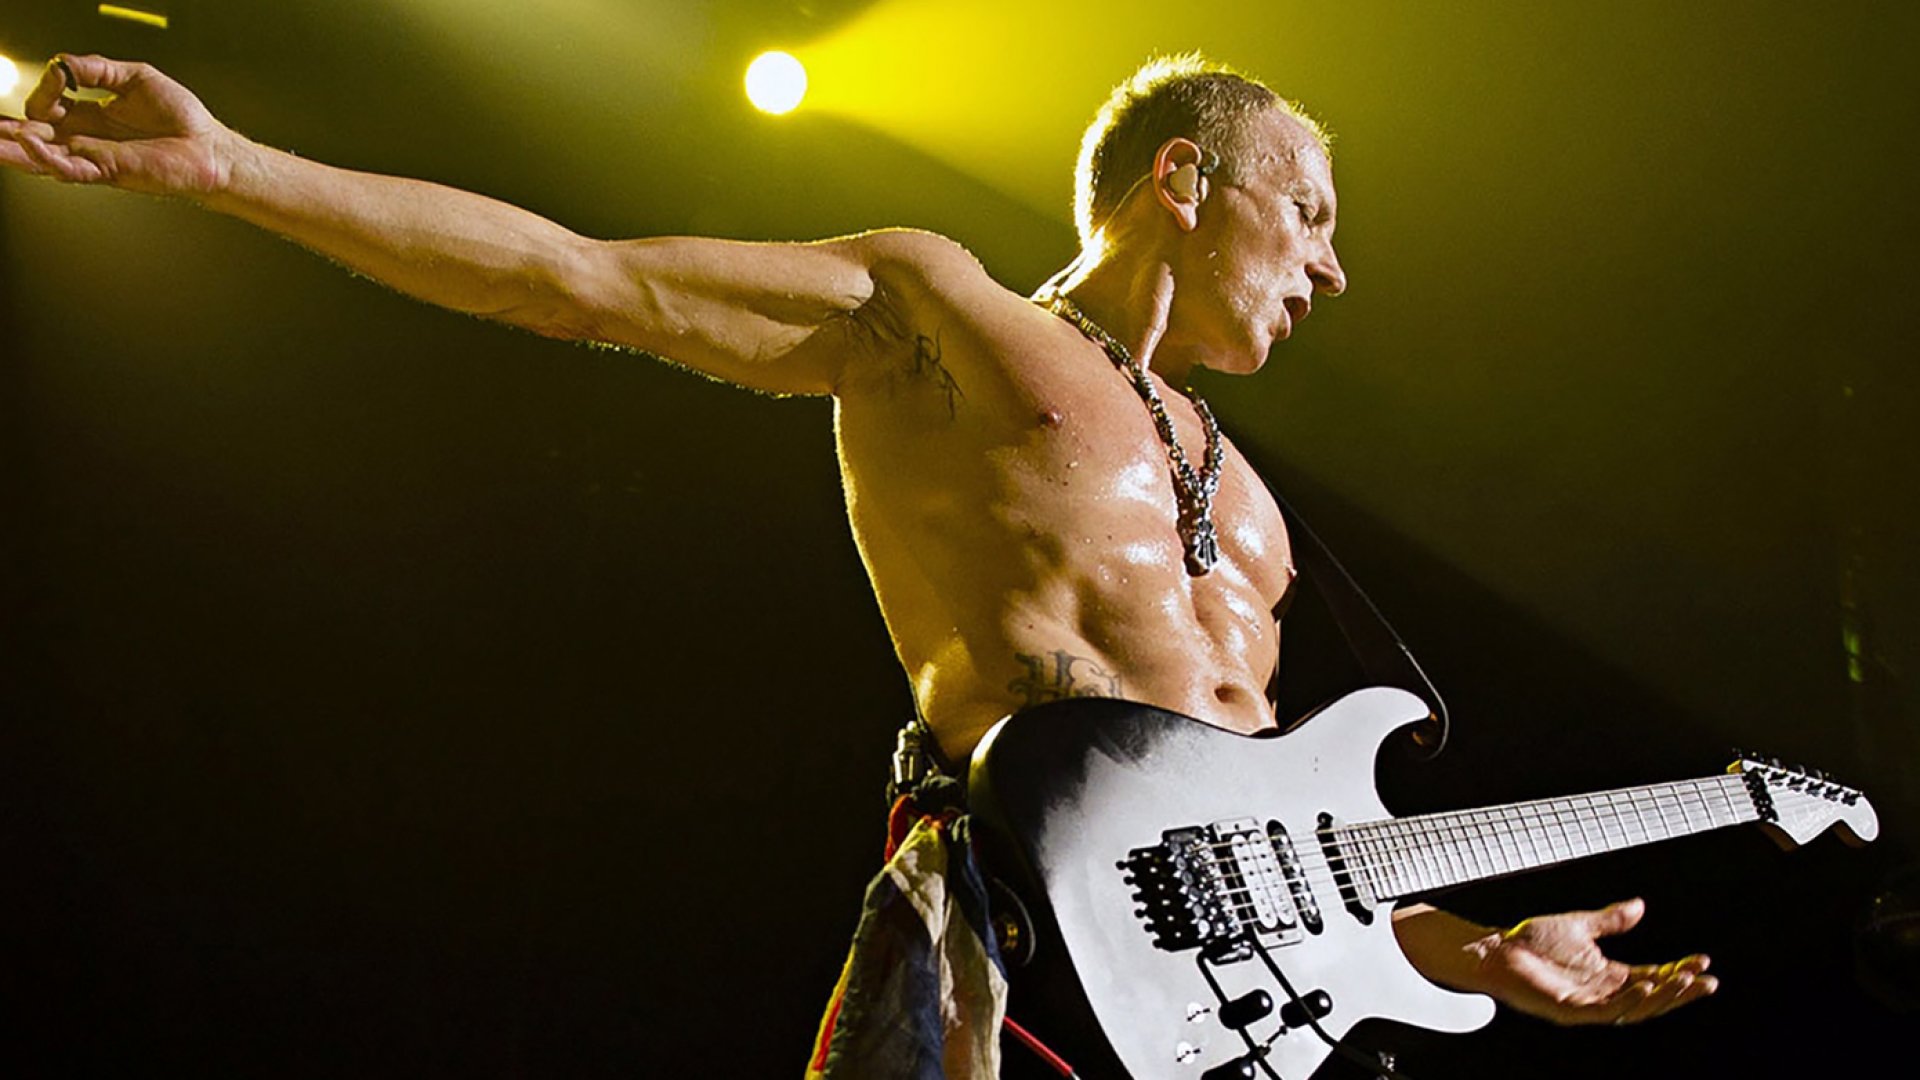 Wishing Phil Collen of Def Leppard a very happy birthday! Have a rock solid 63rd, Phil!   